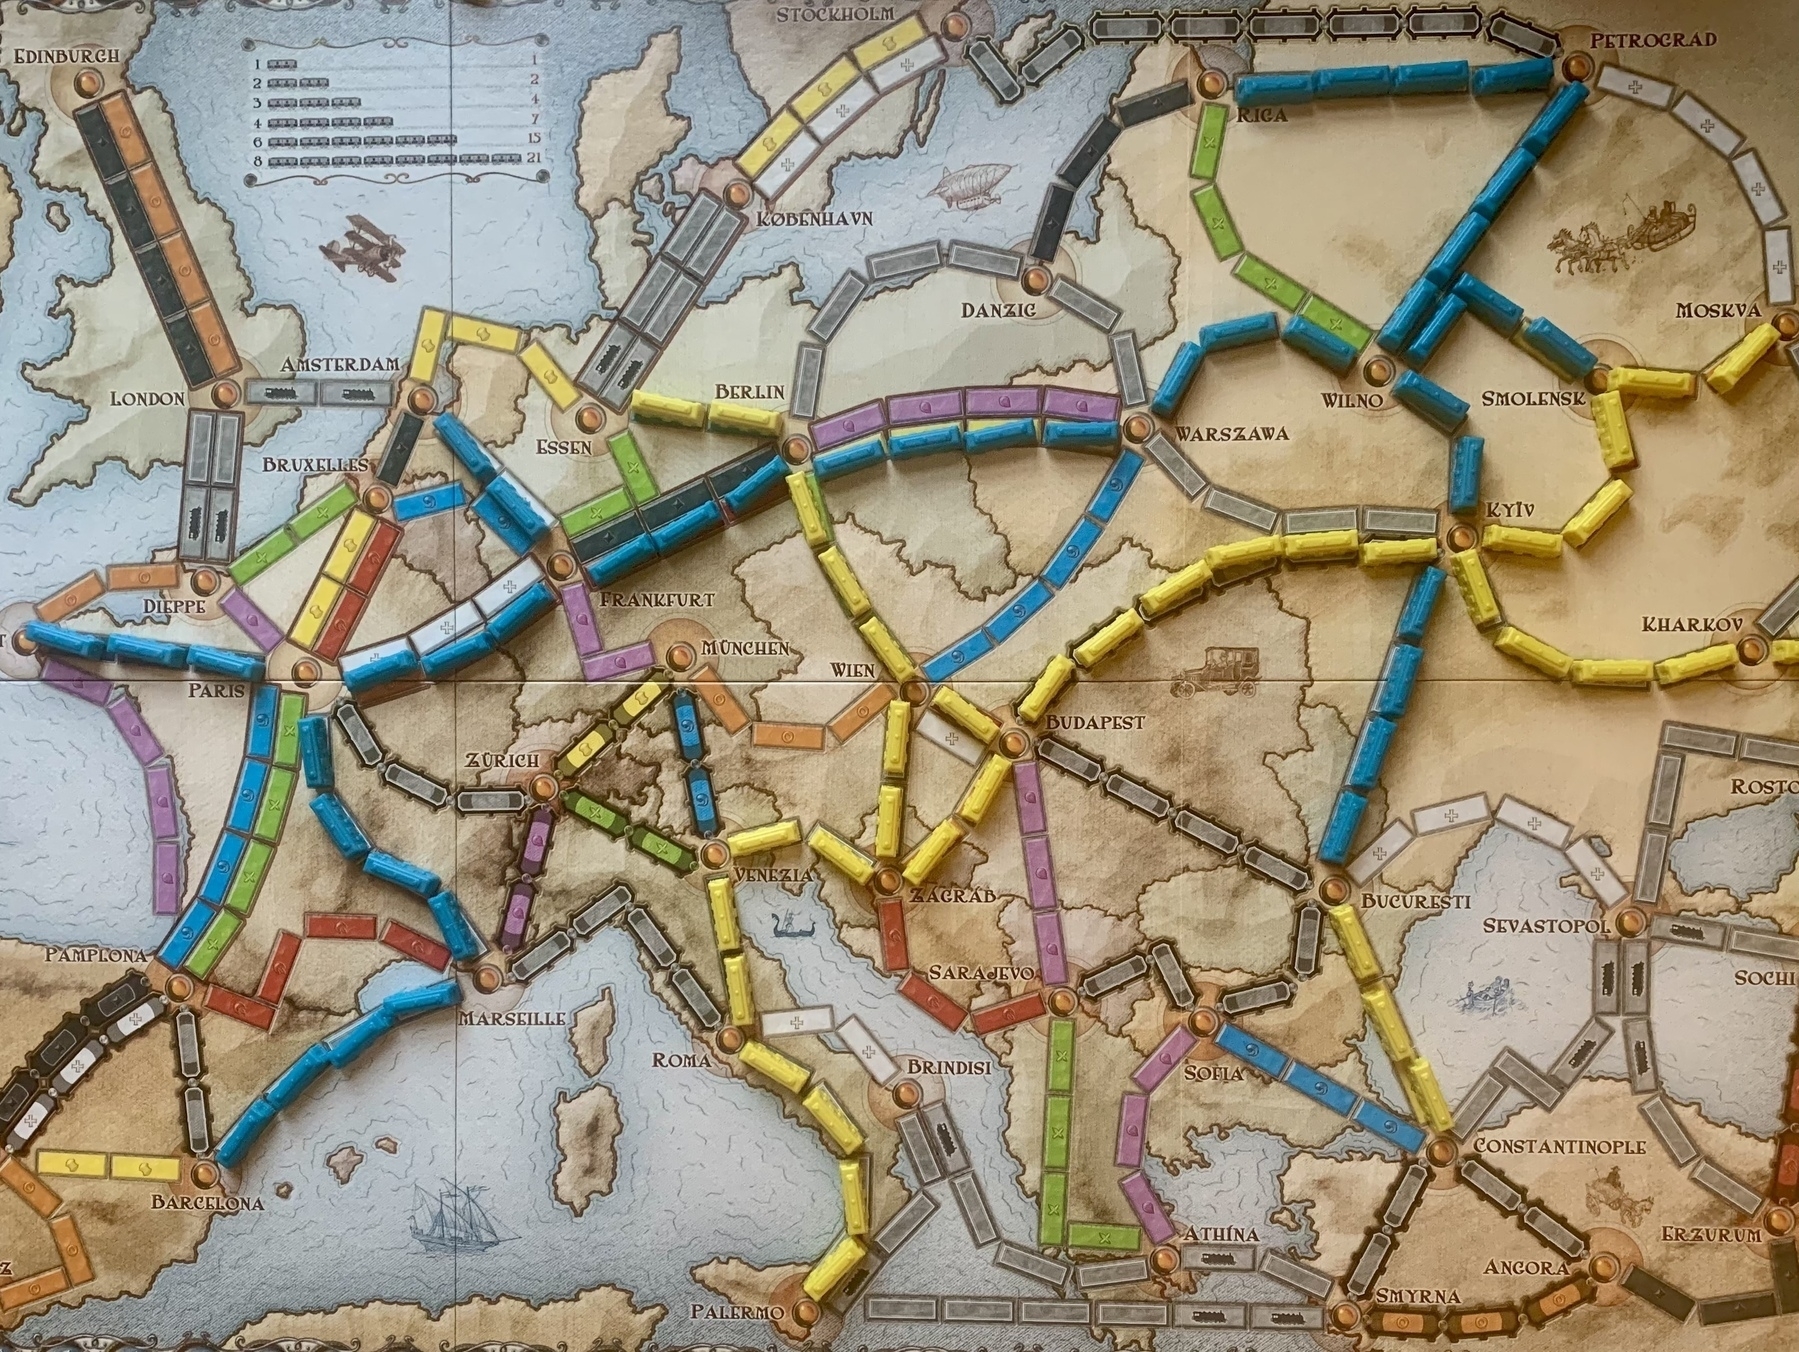 Ticket to Ride Europe game board with yellow and blue plastic train carriages making routes.